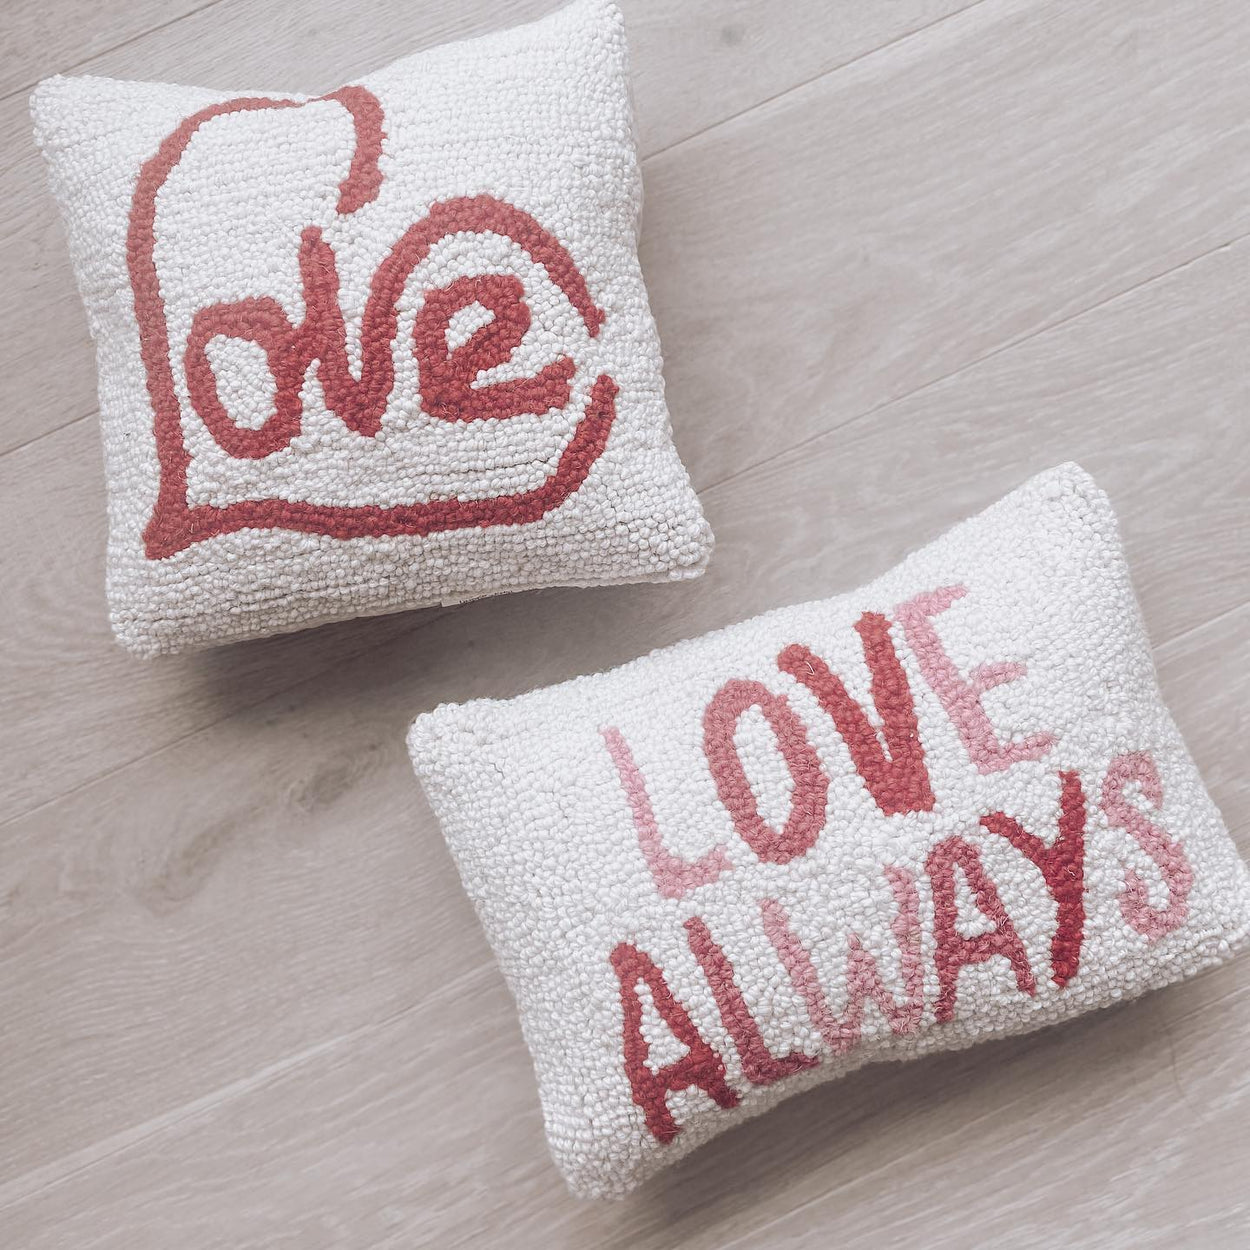 Square "Love" Pillow